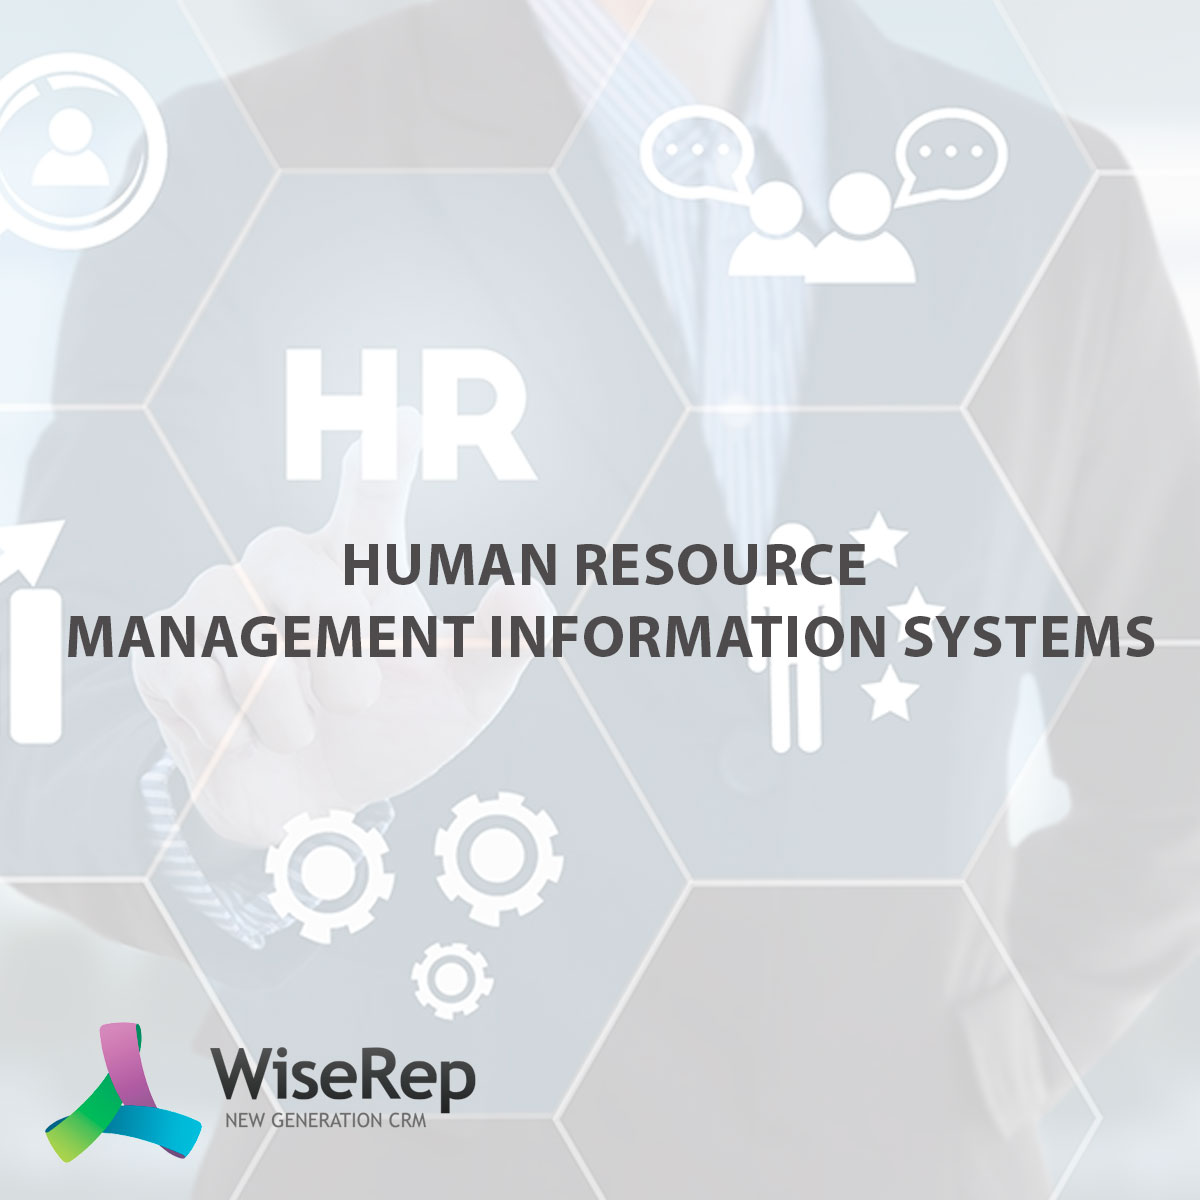  Human Resource Management Information Systems